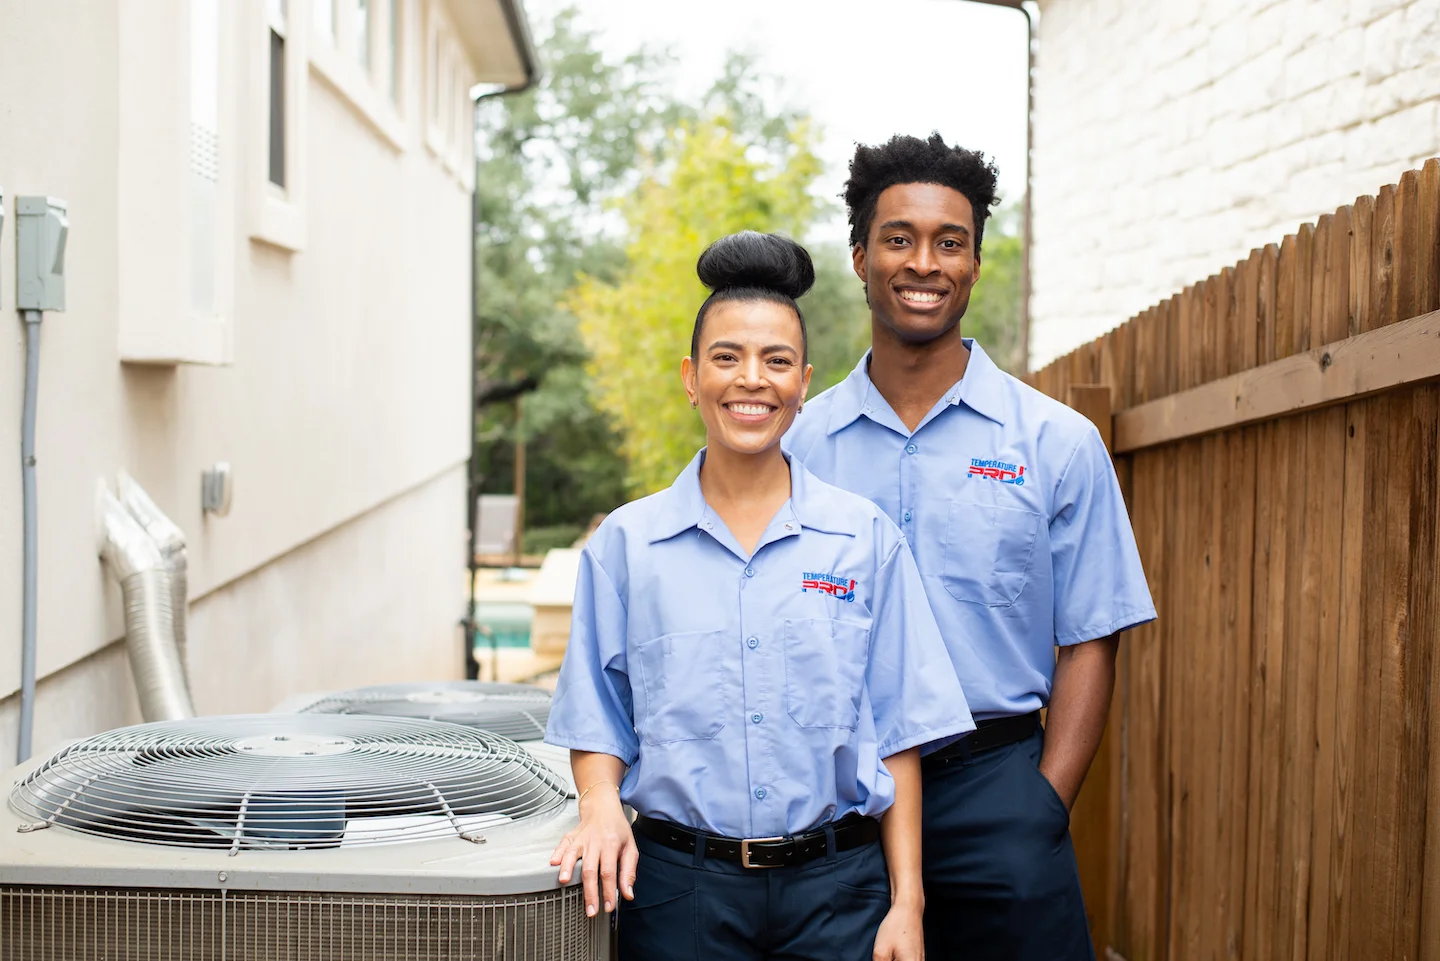 Two TemperaturePro Seattle employees smiling next to an AC condenser.